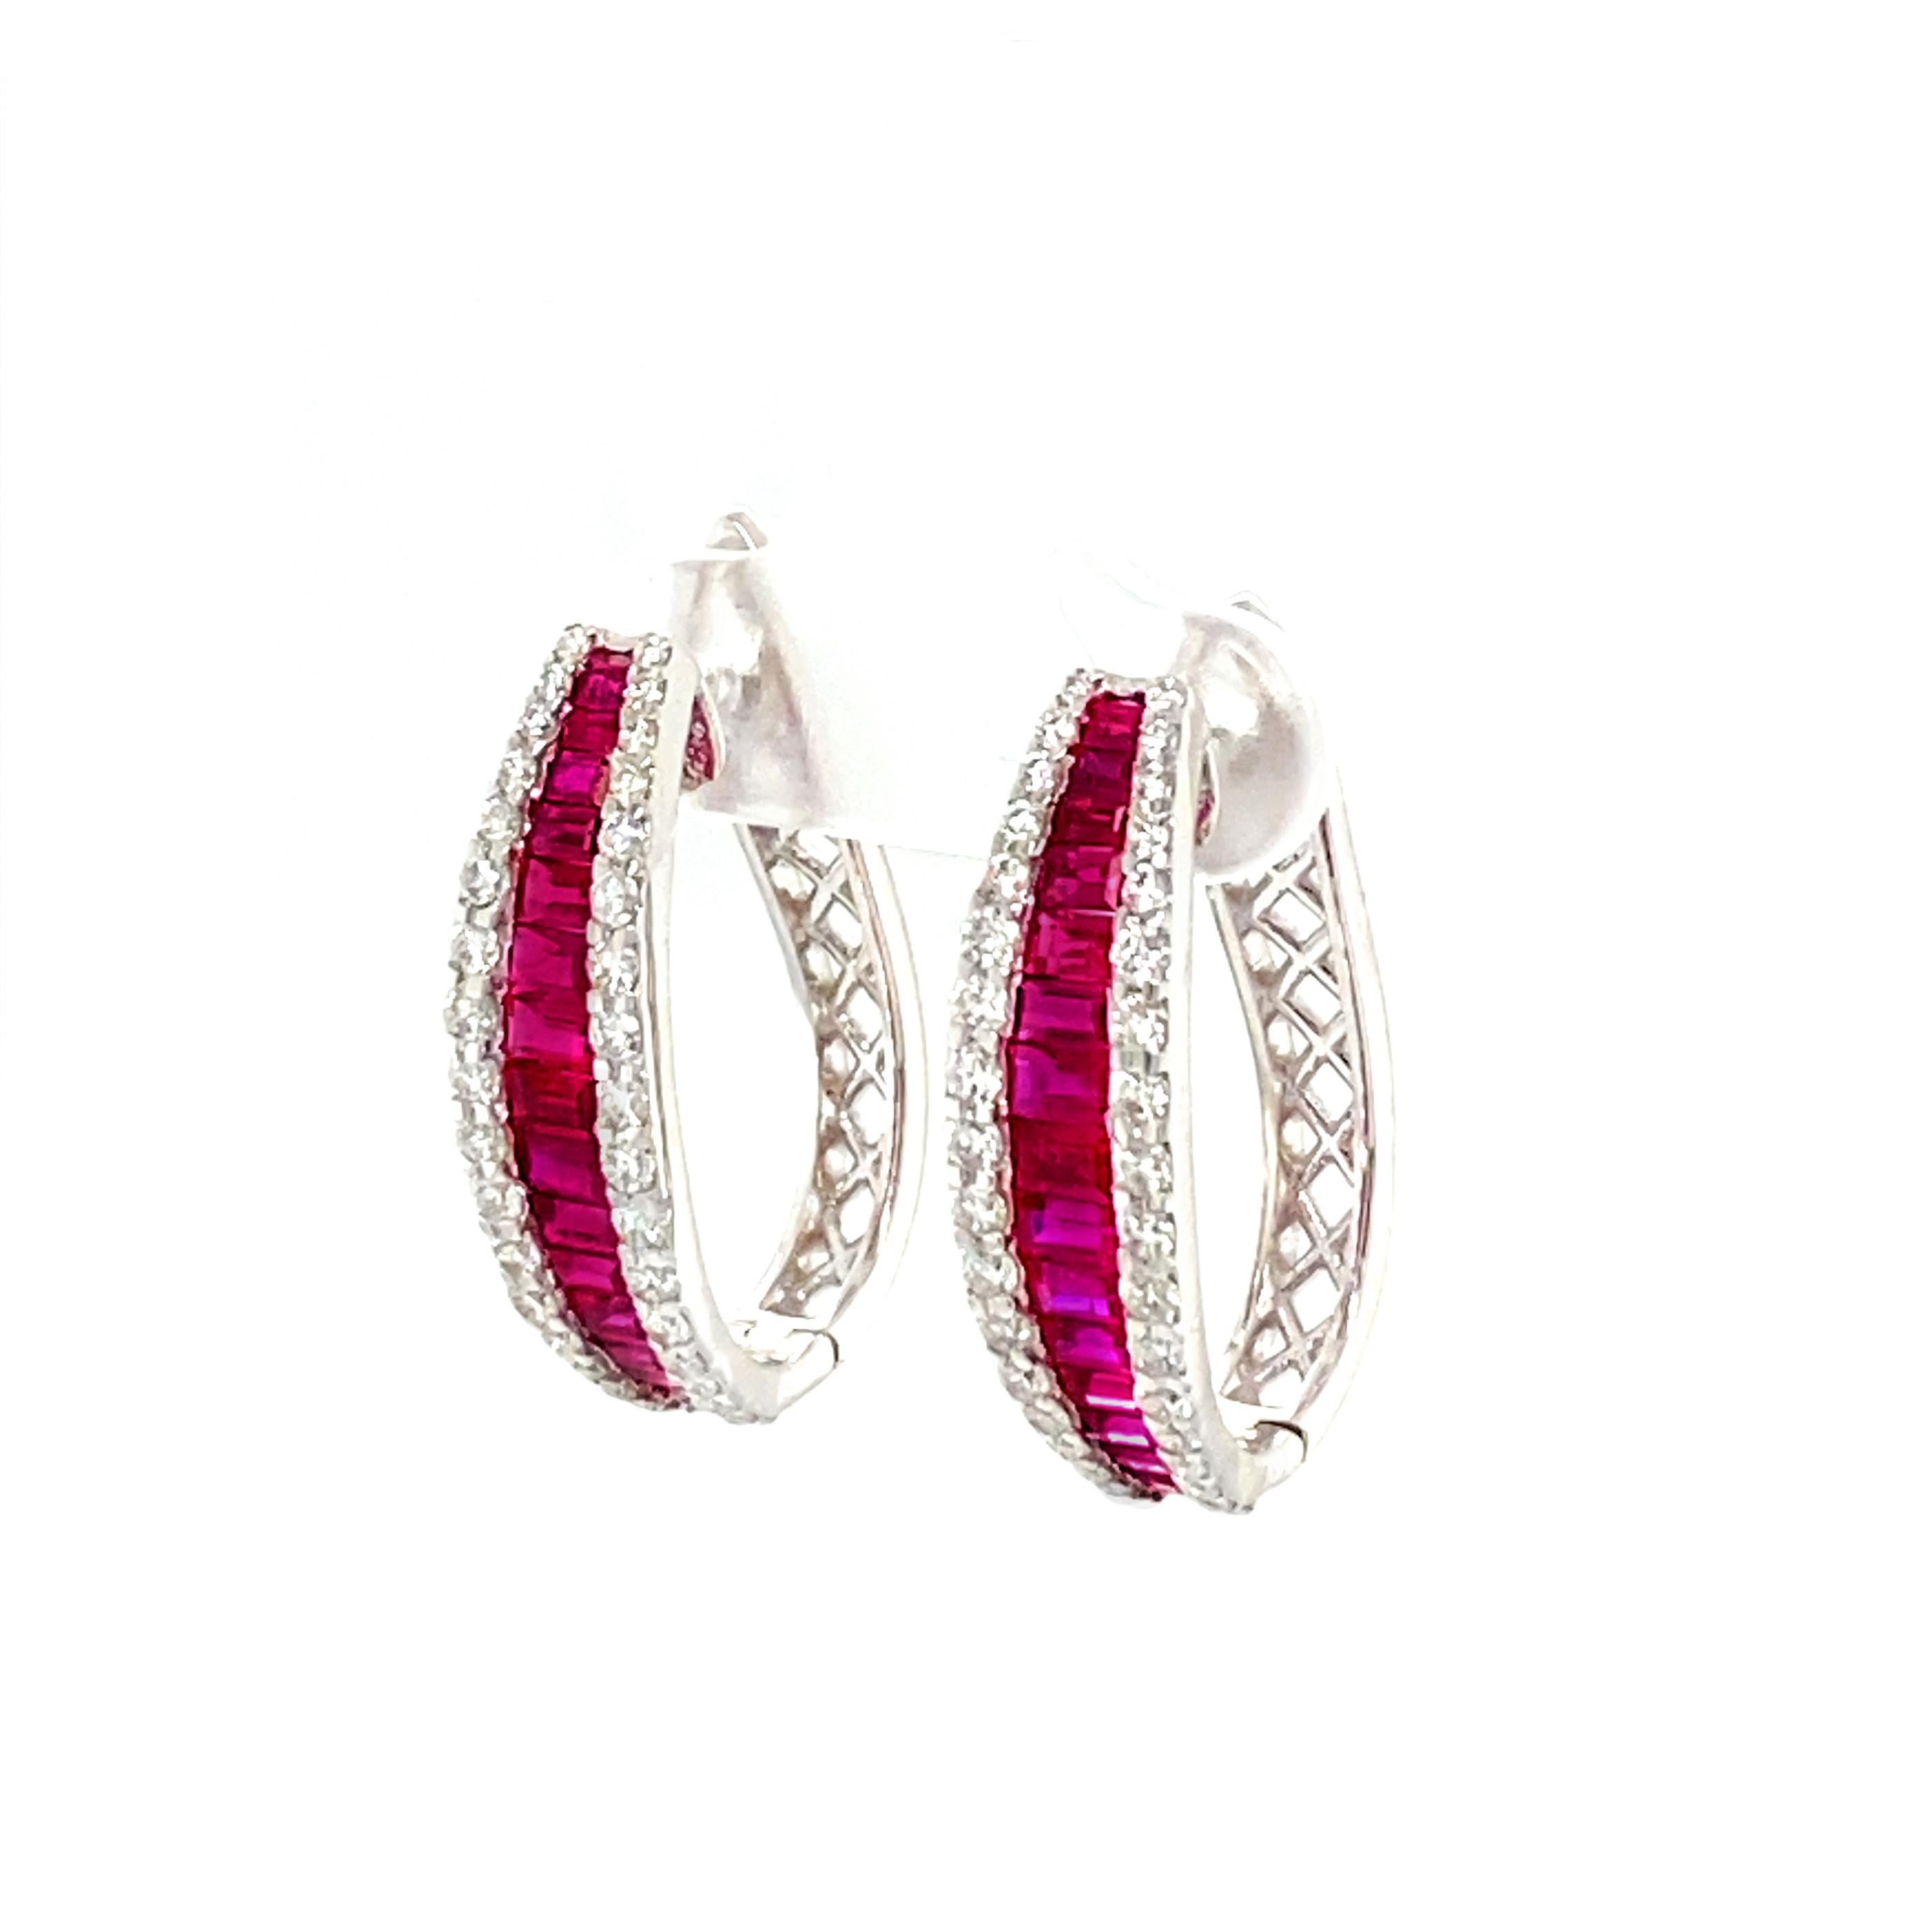 Round Cut 2.80 Carat Ruby and 1.20 Carat Diamond Earrings For Sale